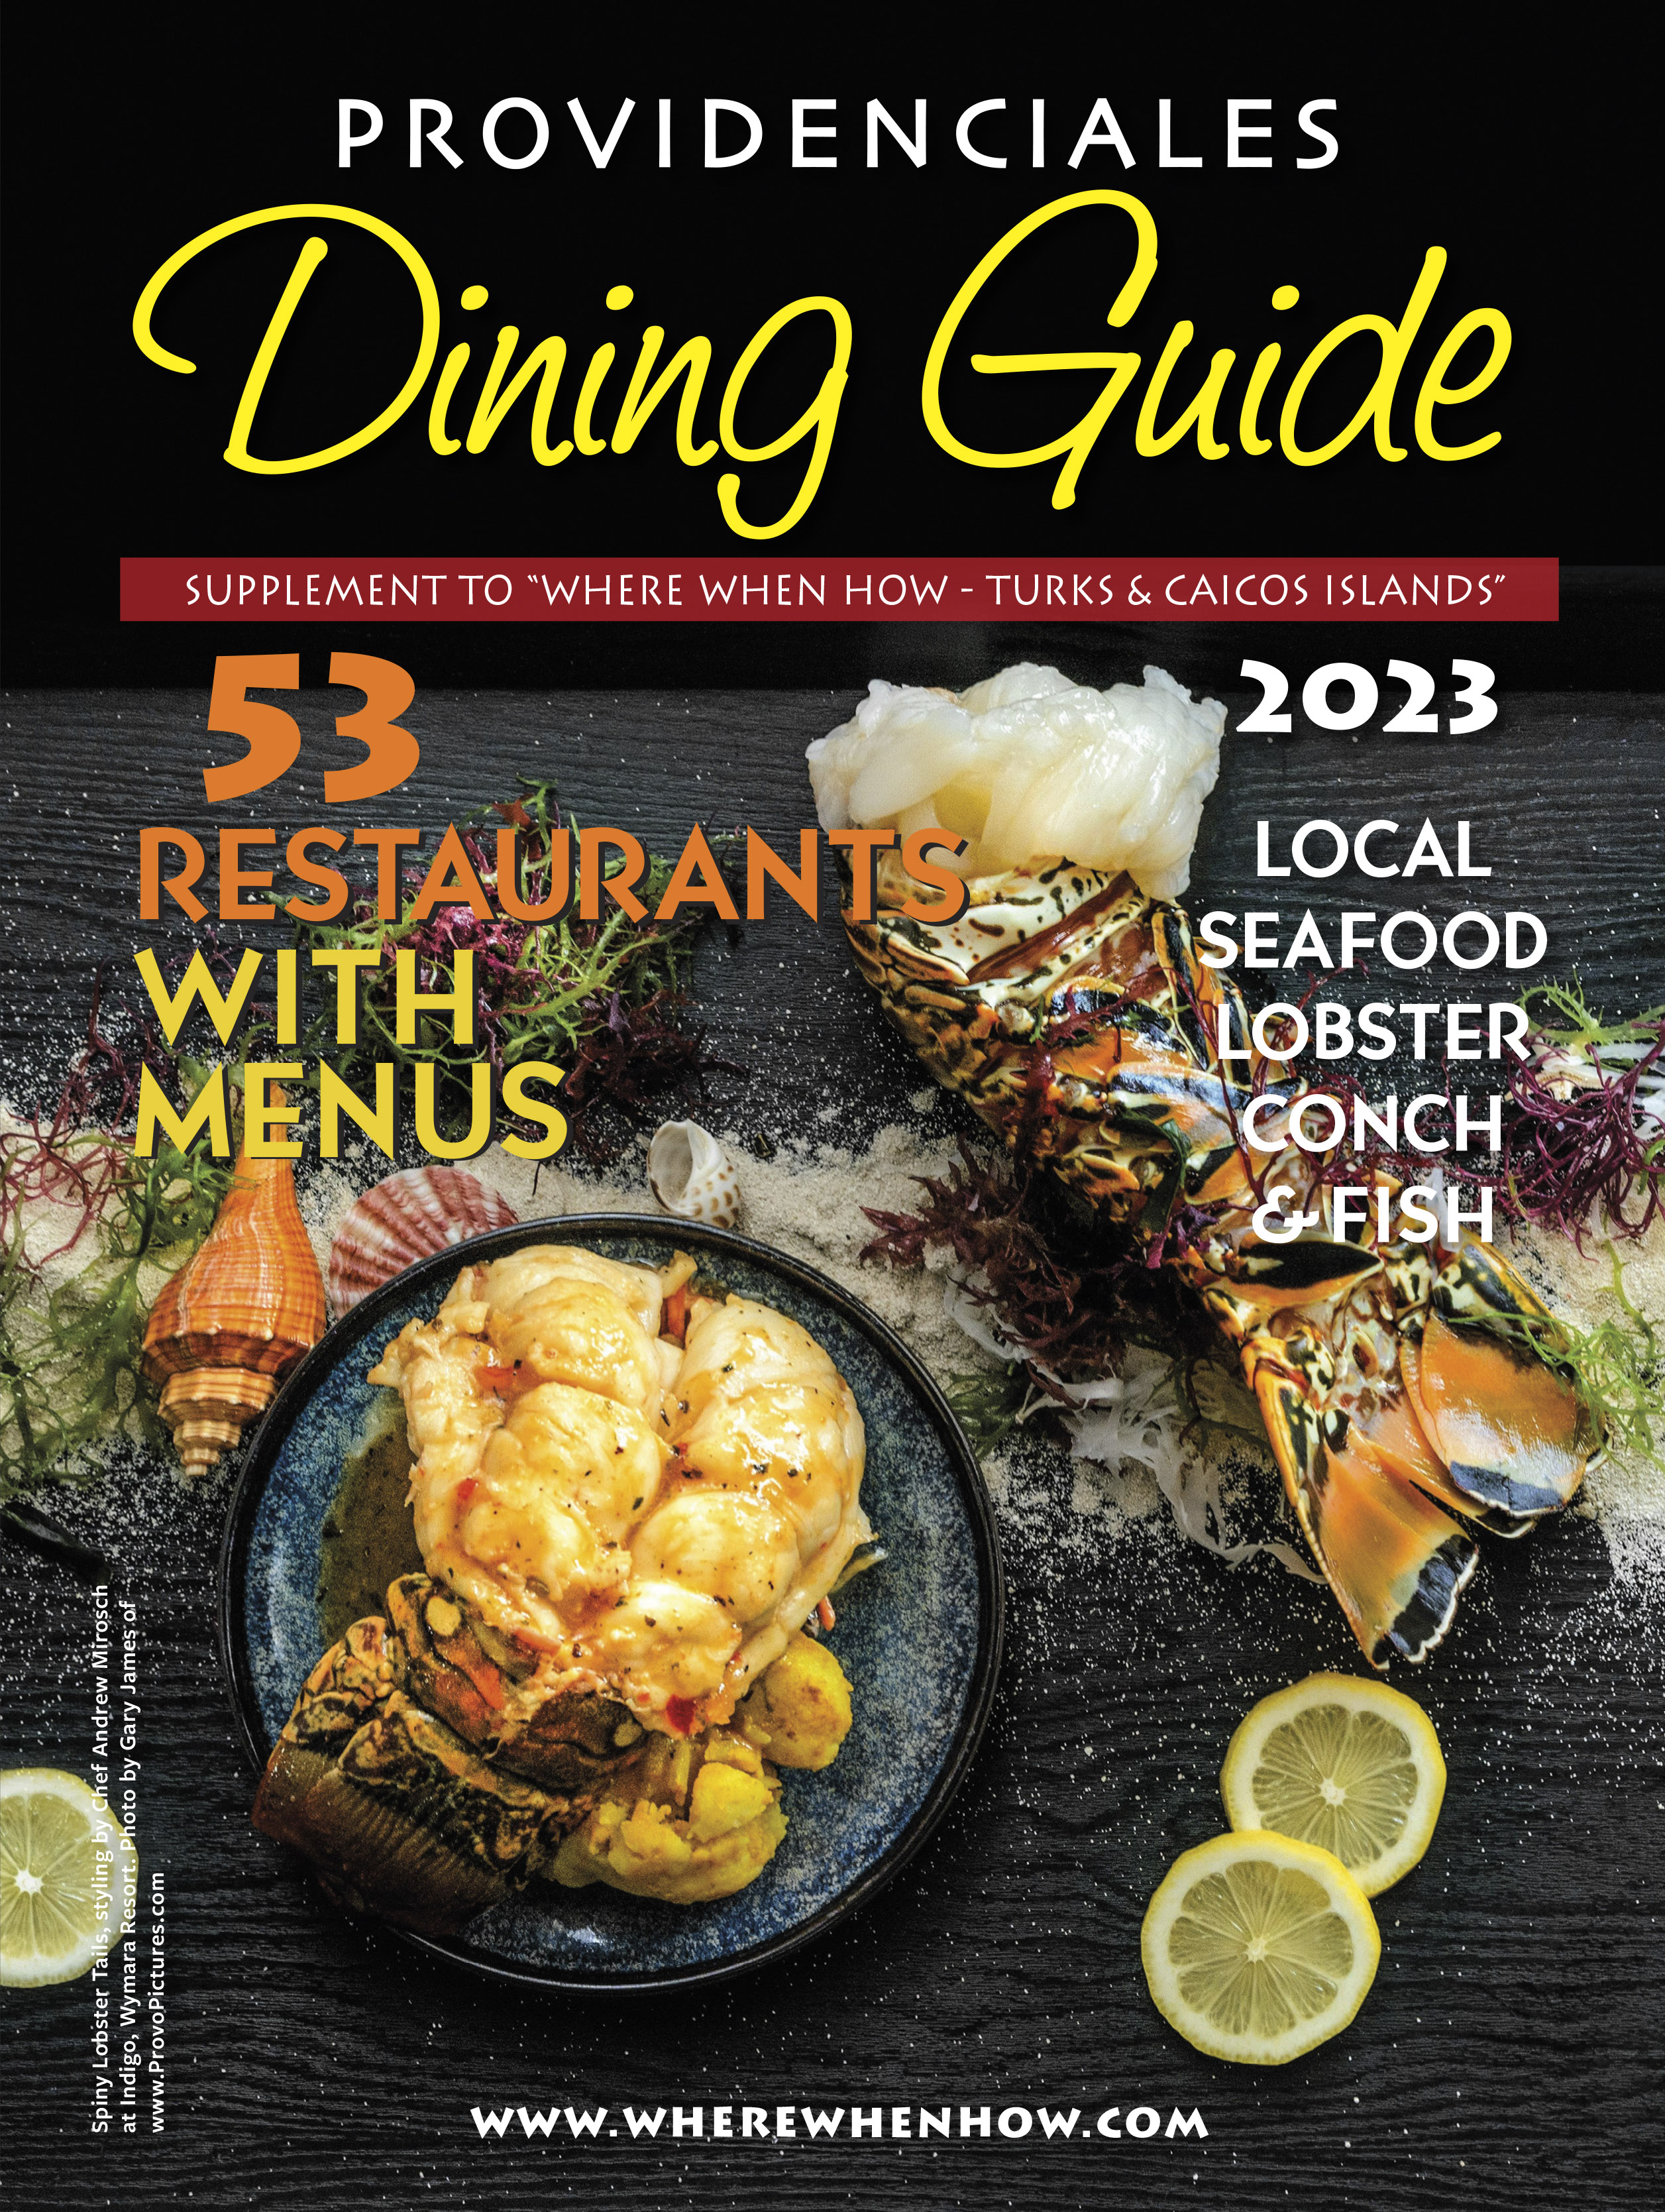 Read our 2023 issue of Providenciales Dining Guide magazine!